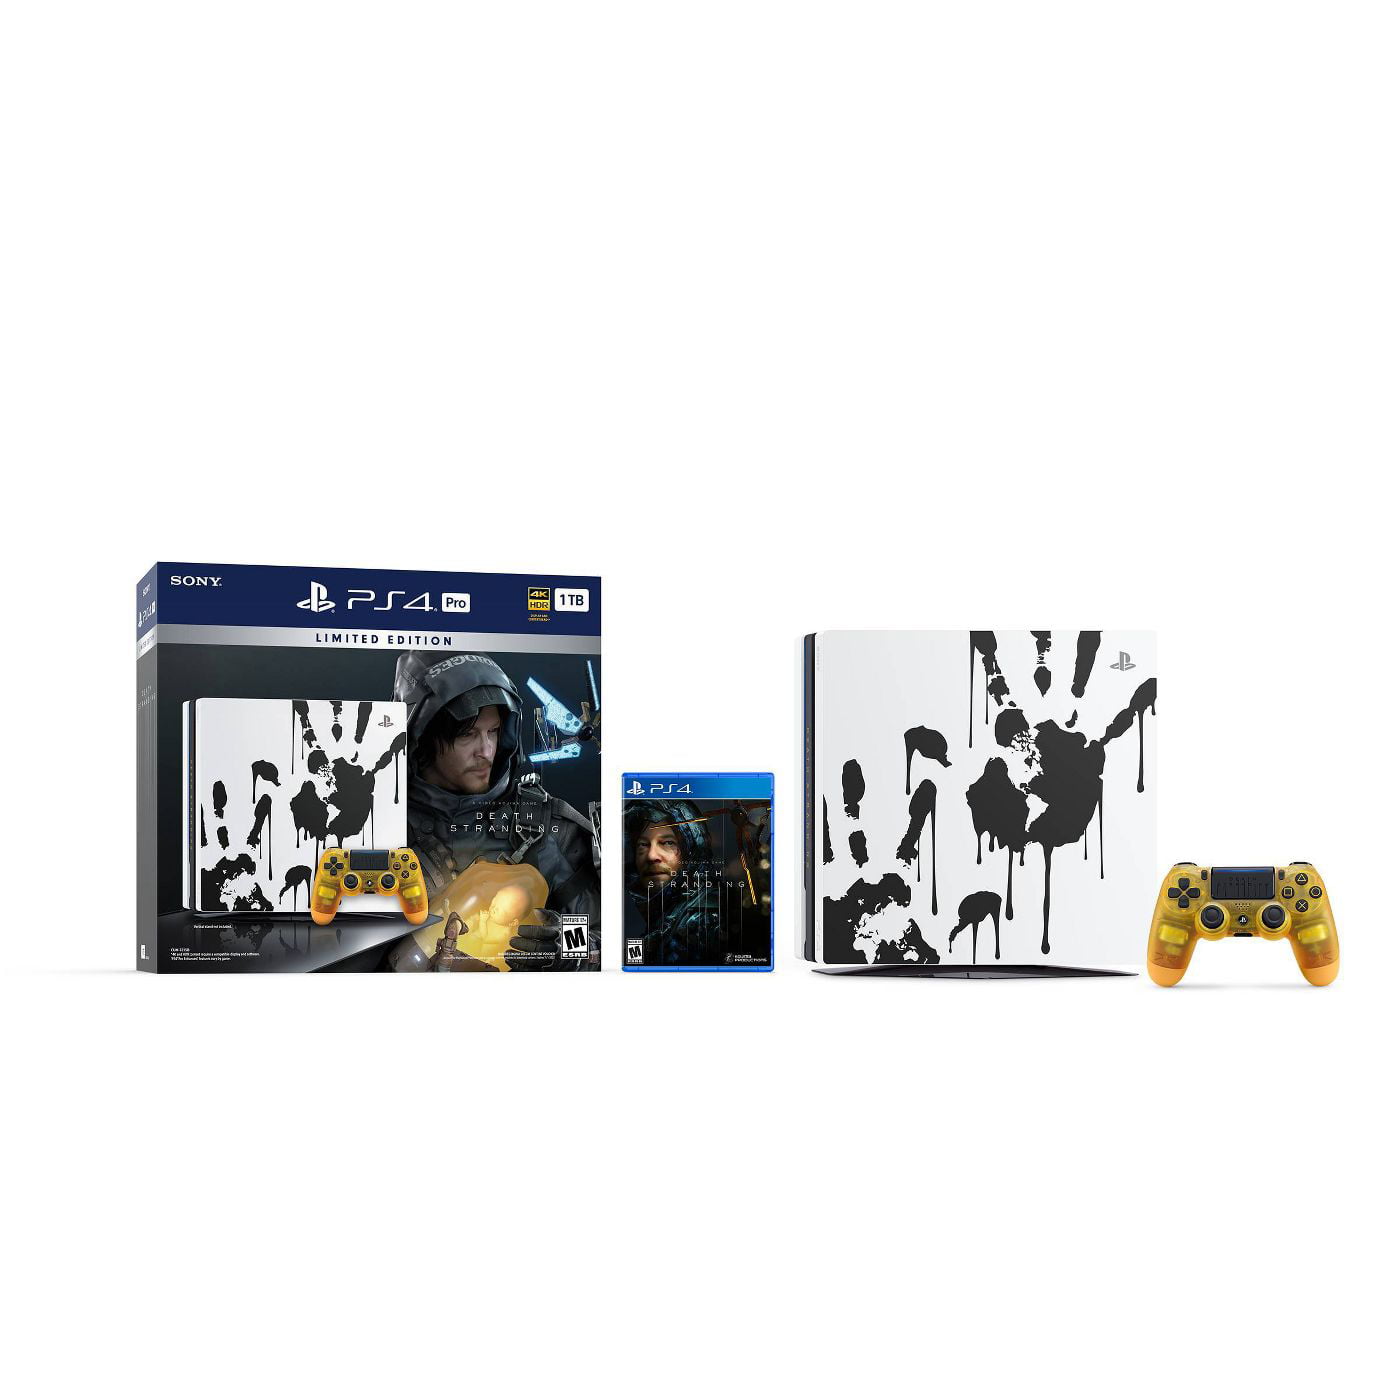 Sony 4 Pro 1TB Limited Edition PS4 Console - Death Stranding Bundle (Includes Physical Disc) - Walmart.com